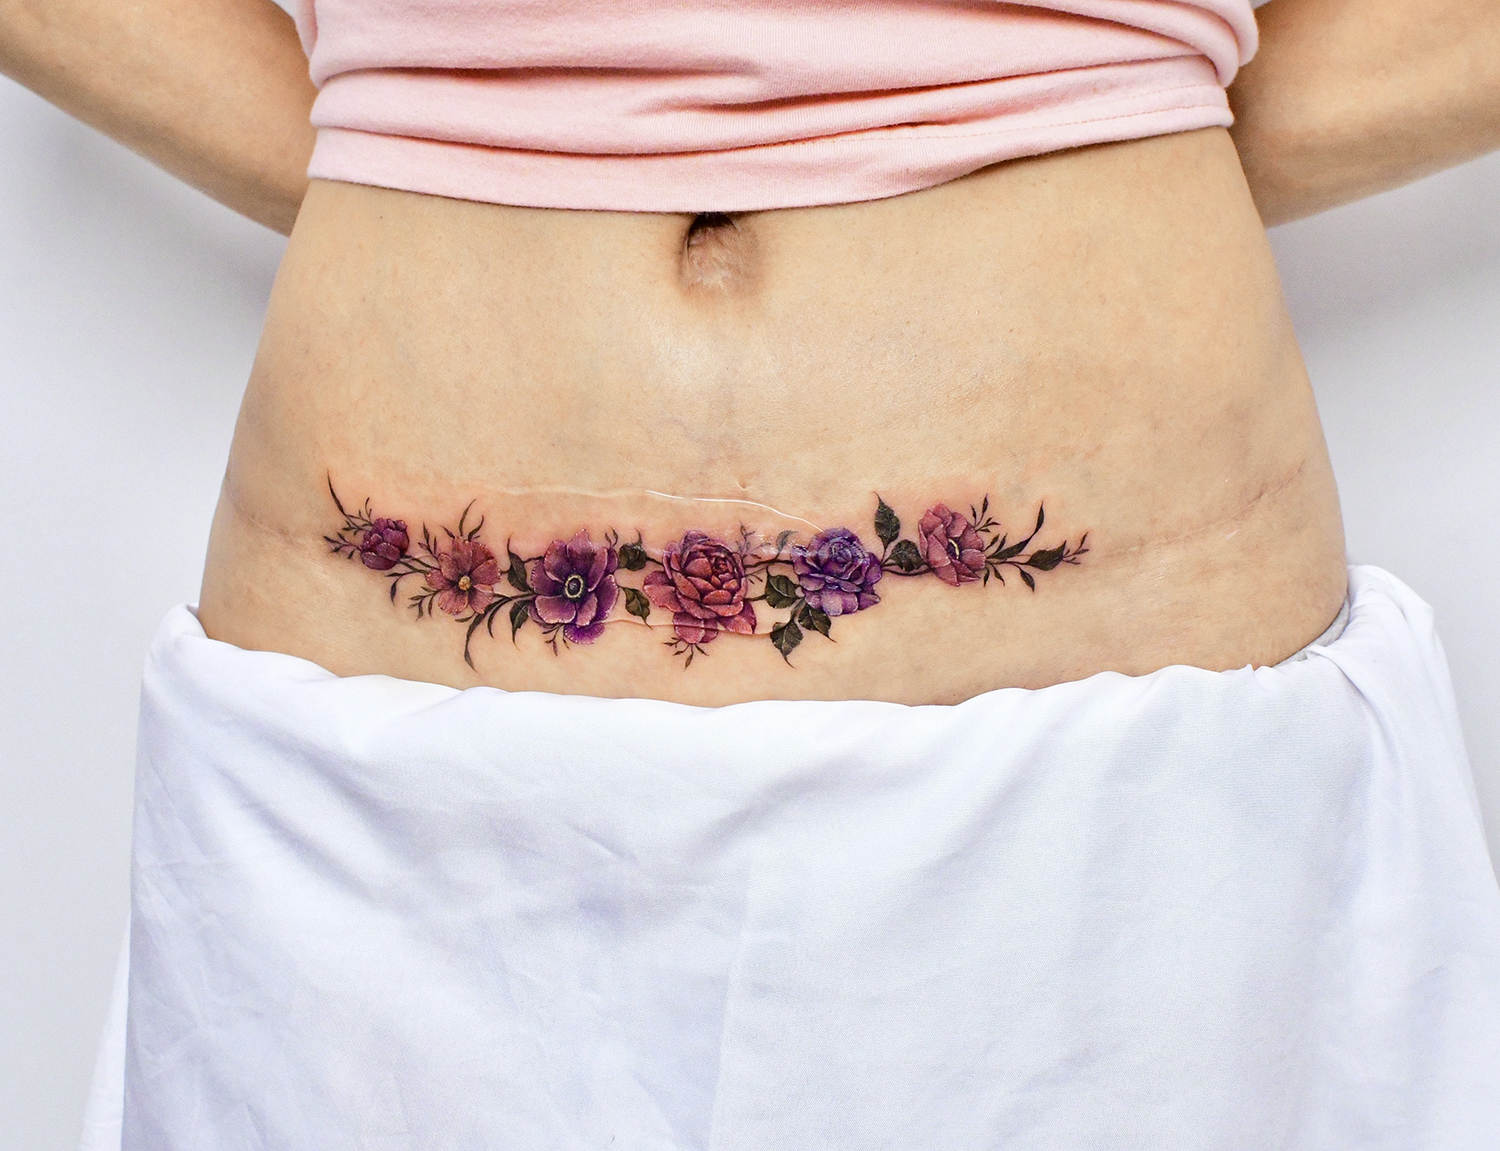 tattoo cover up over c-section scar incision, healing